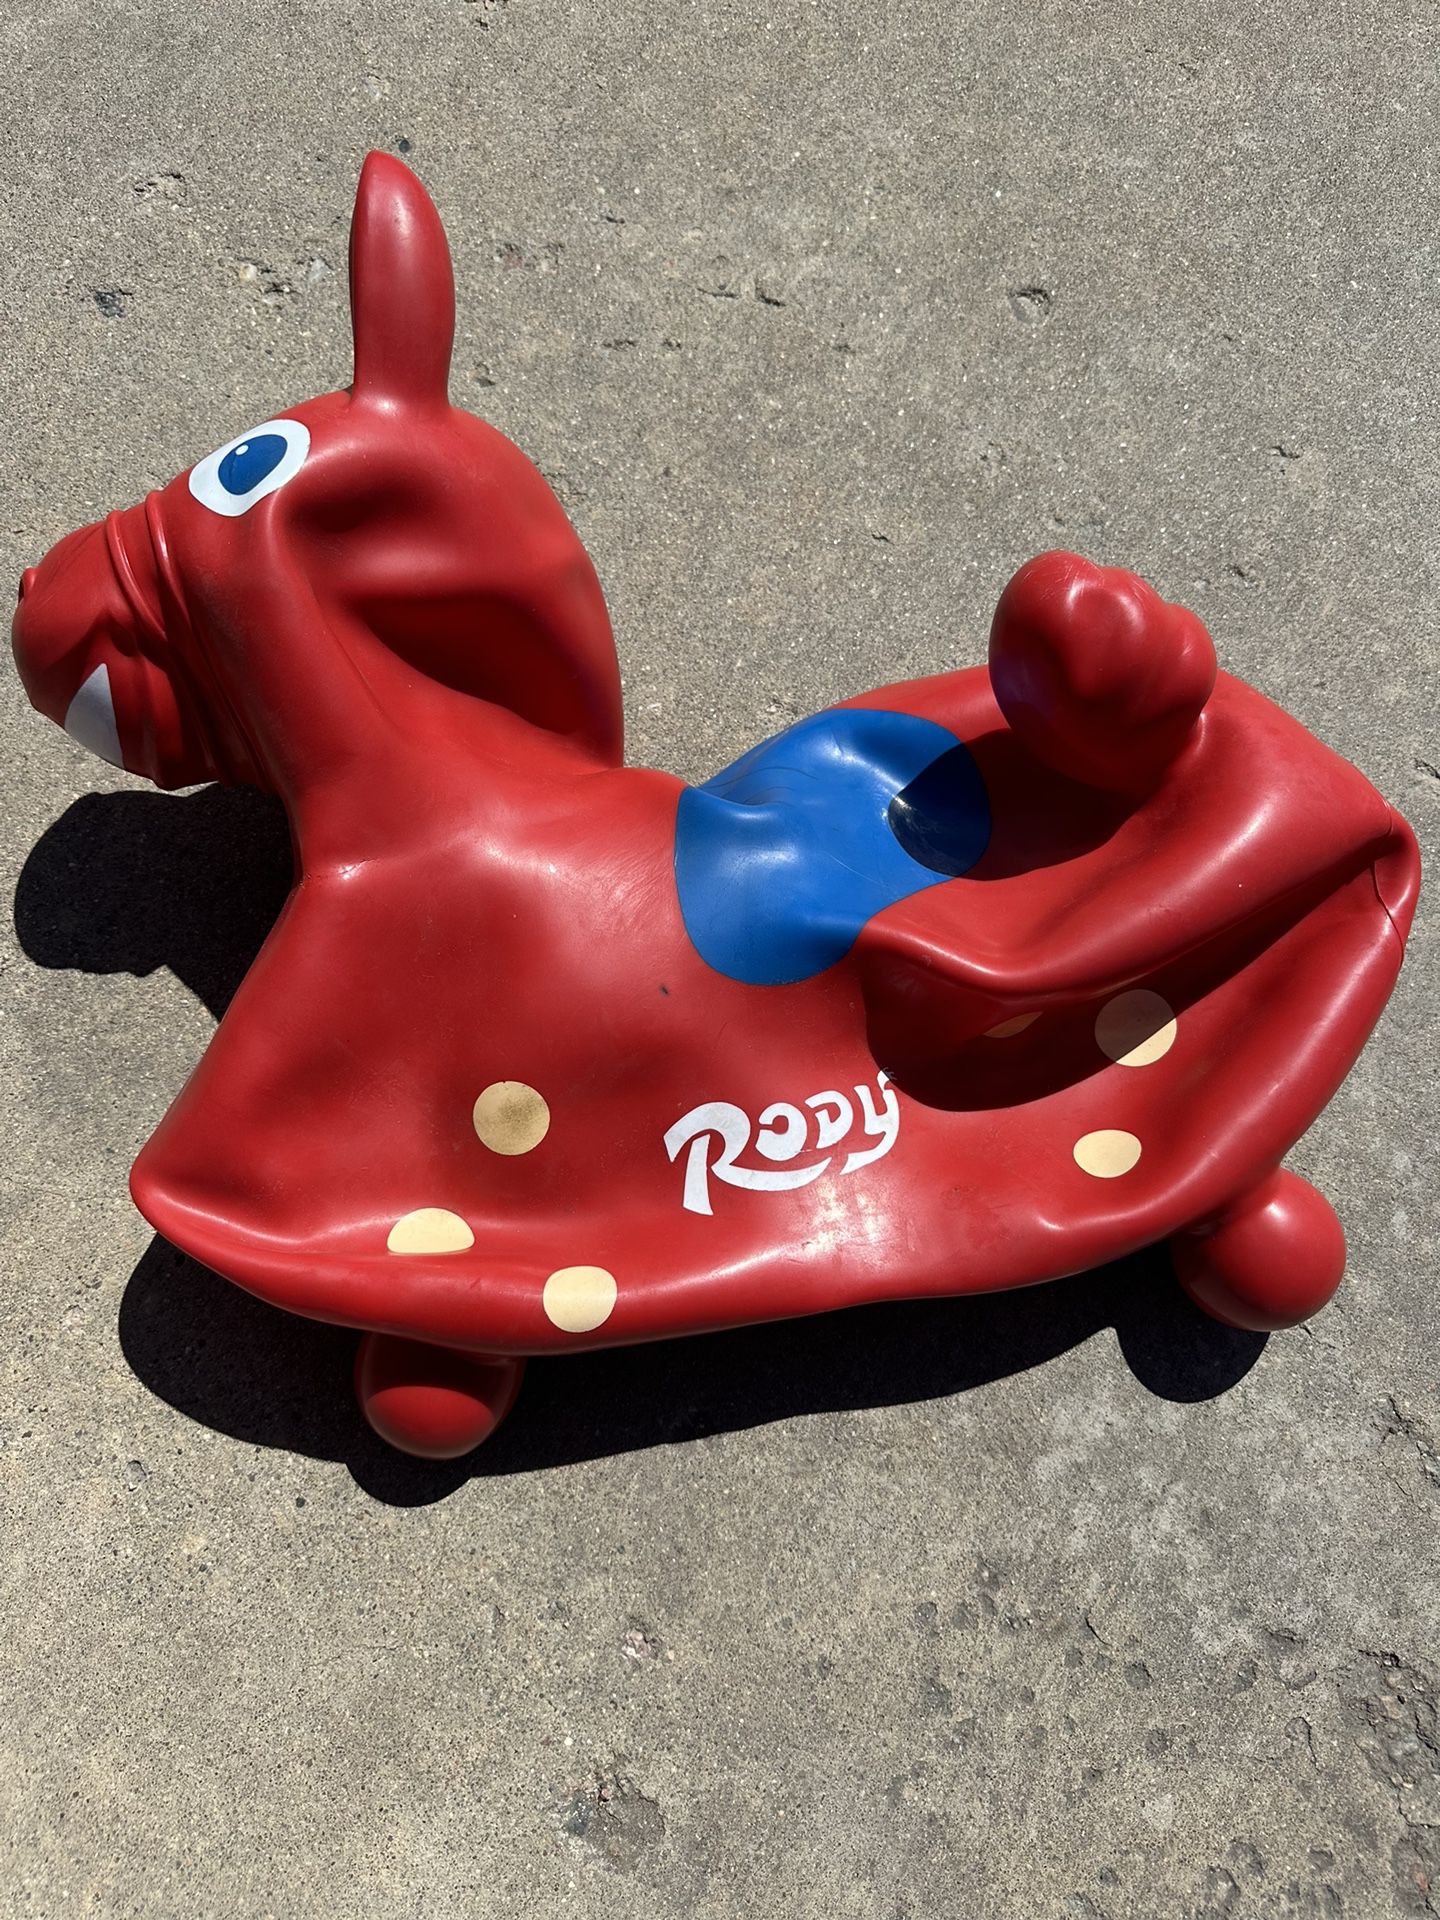 Gymnic Rody Bounce Horse- Red